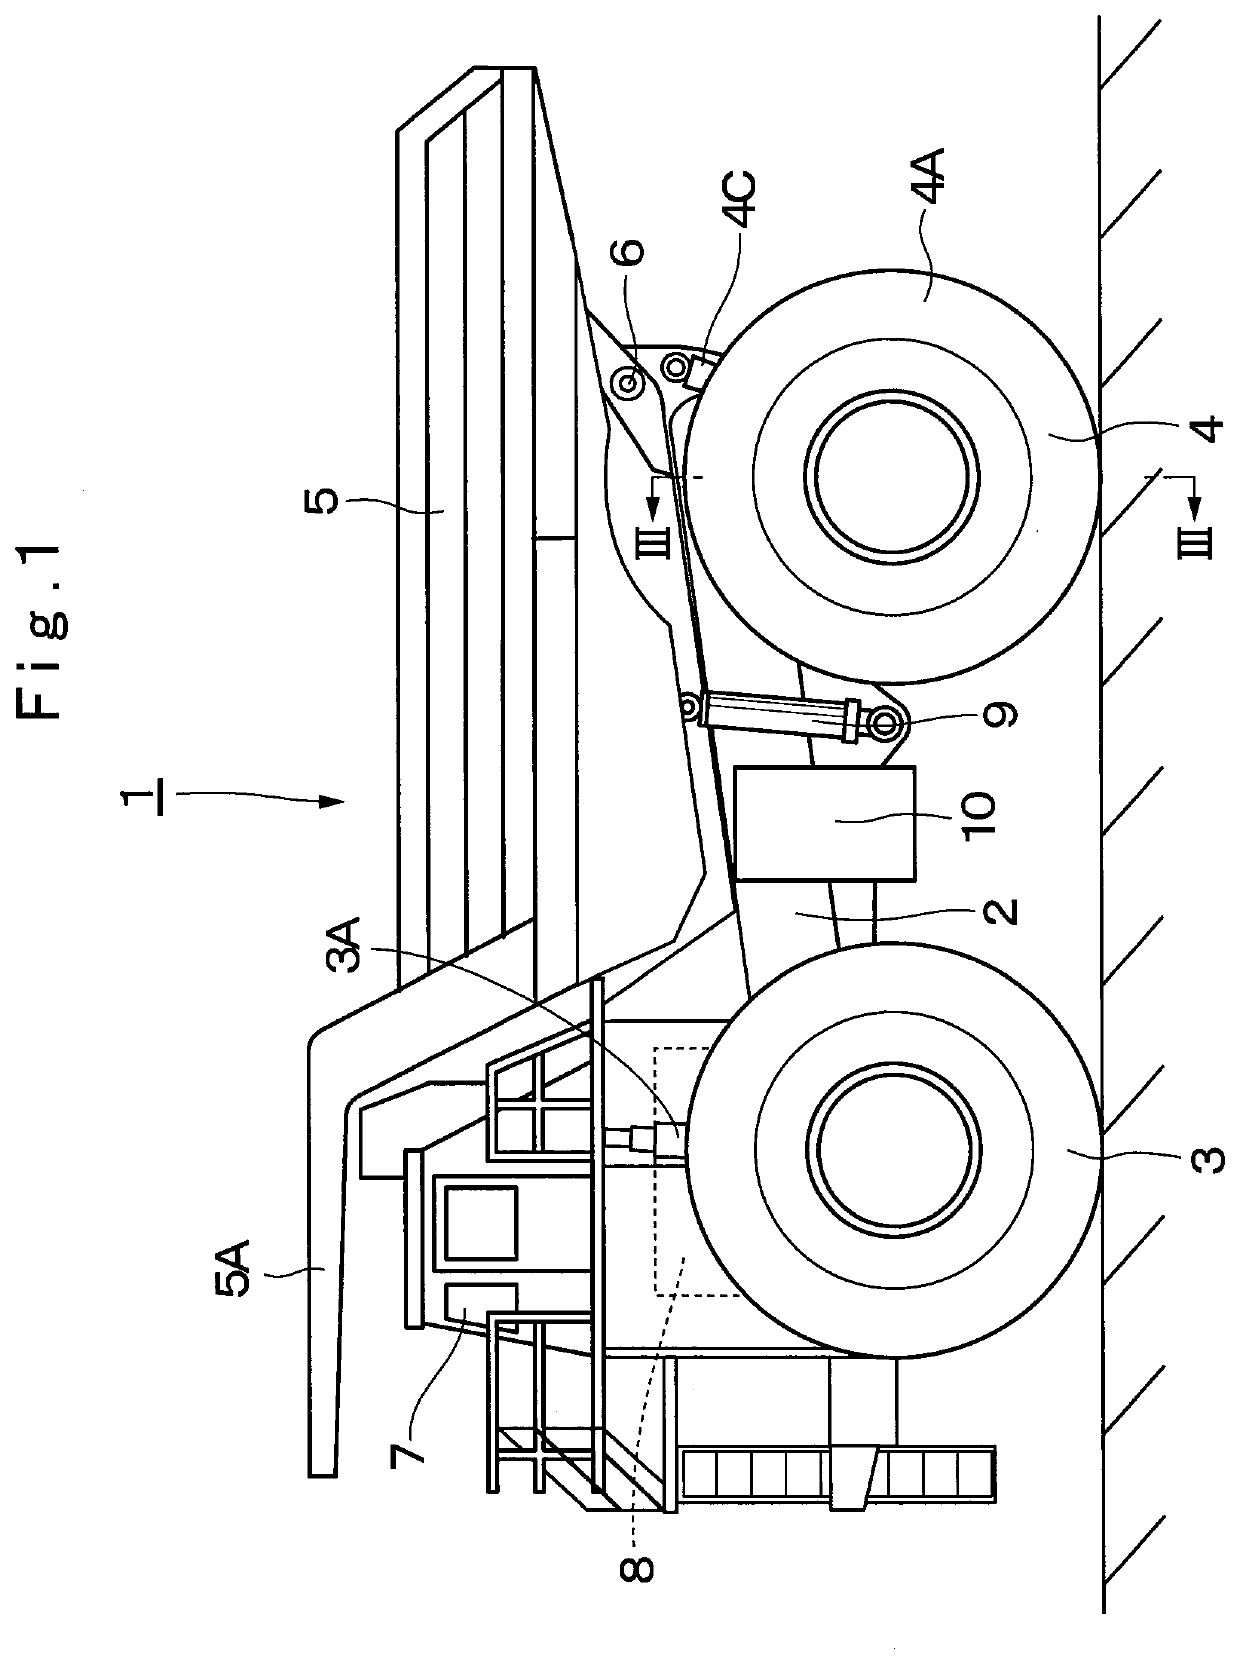 Working vehicle with traveling device having wheels